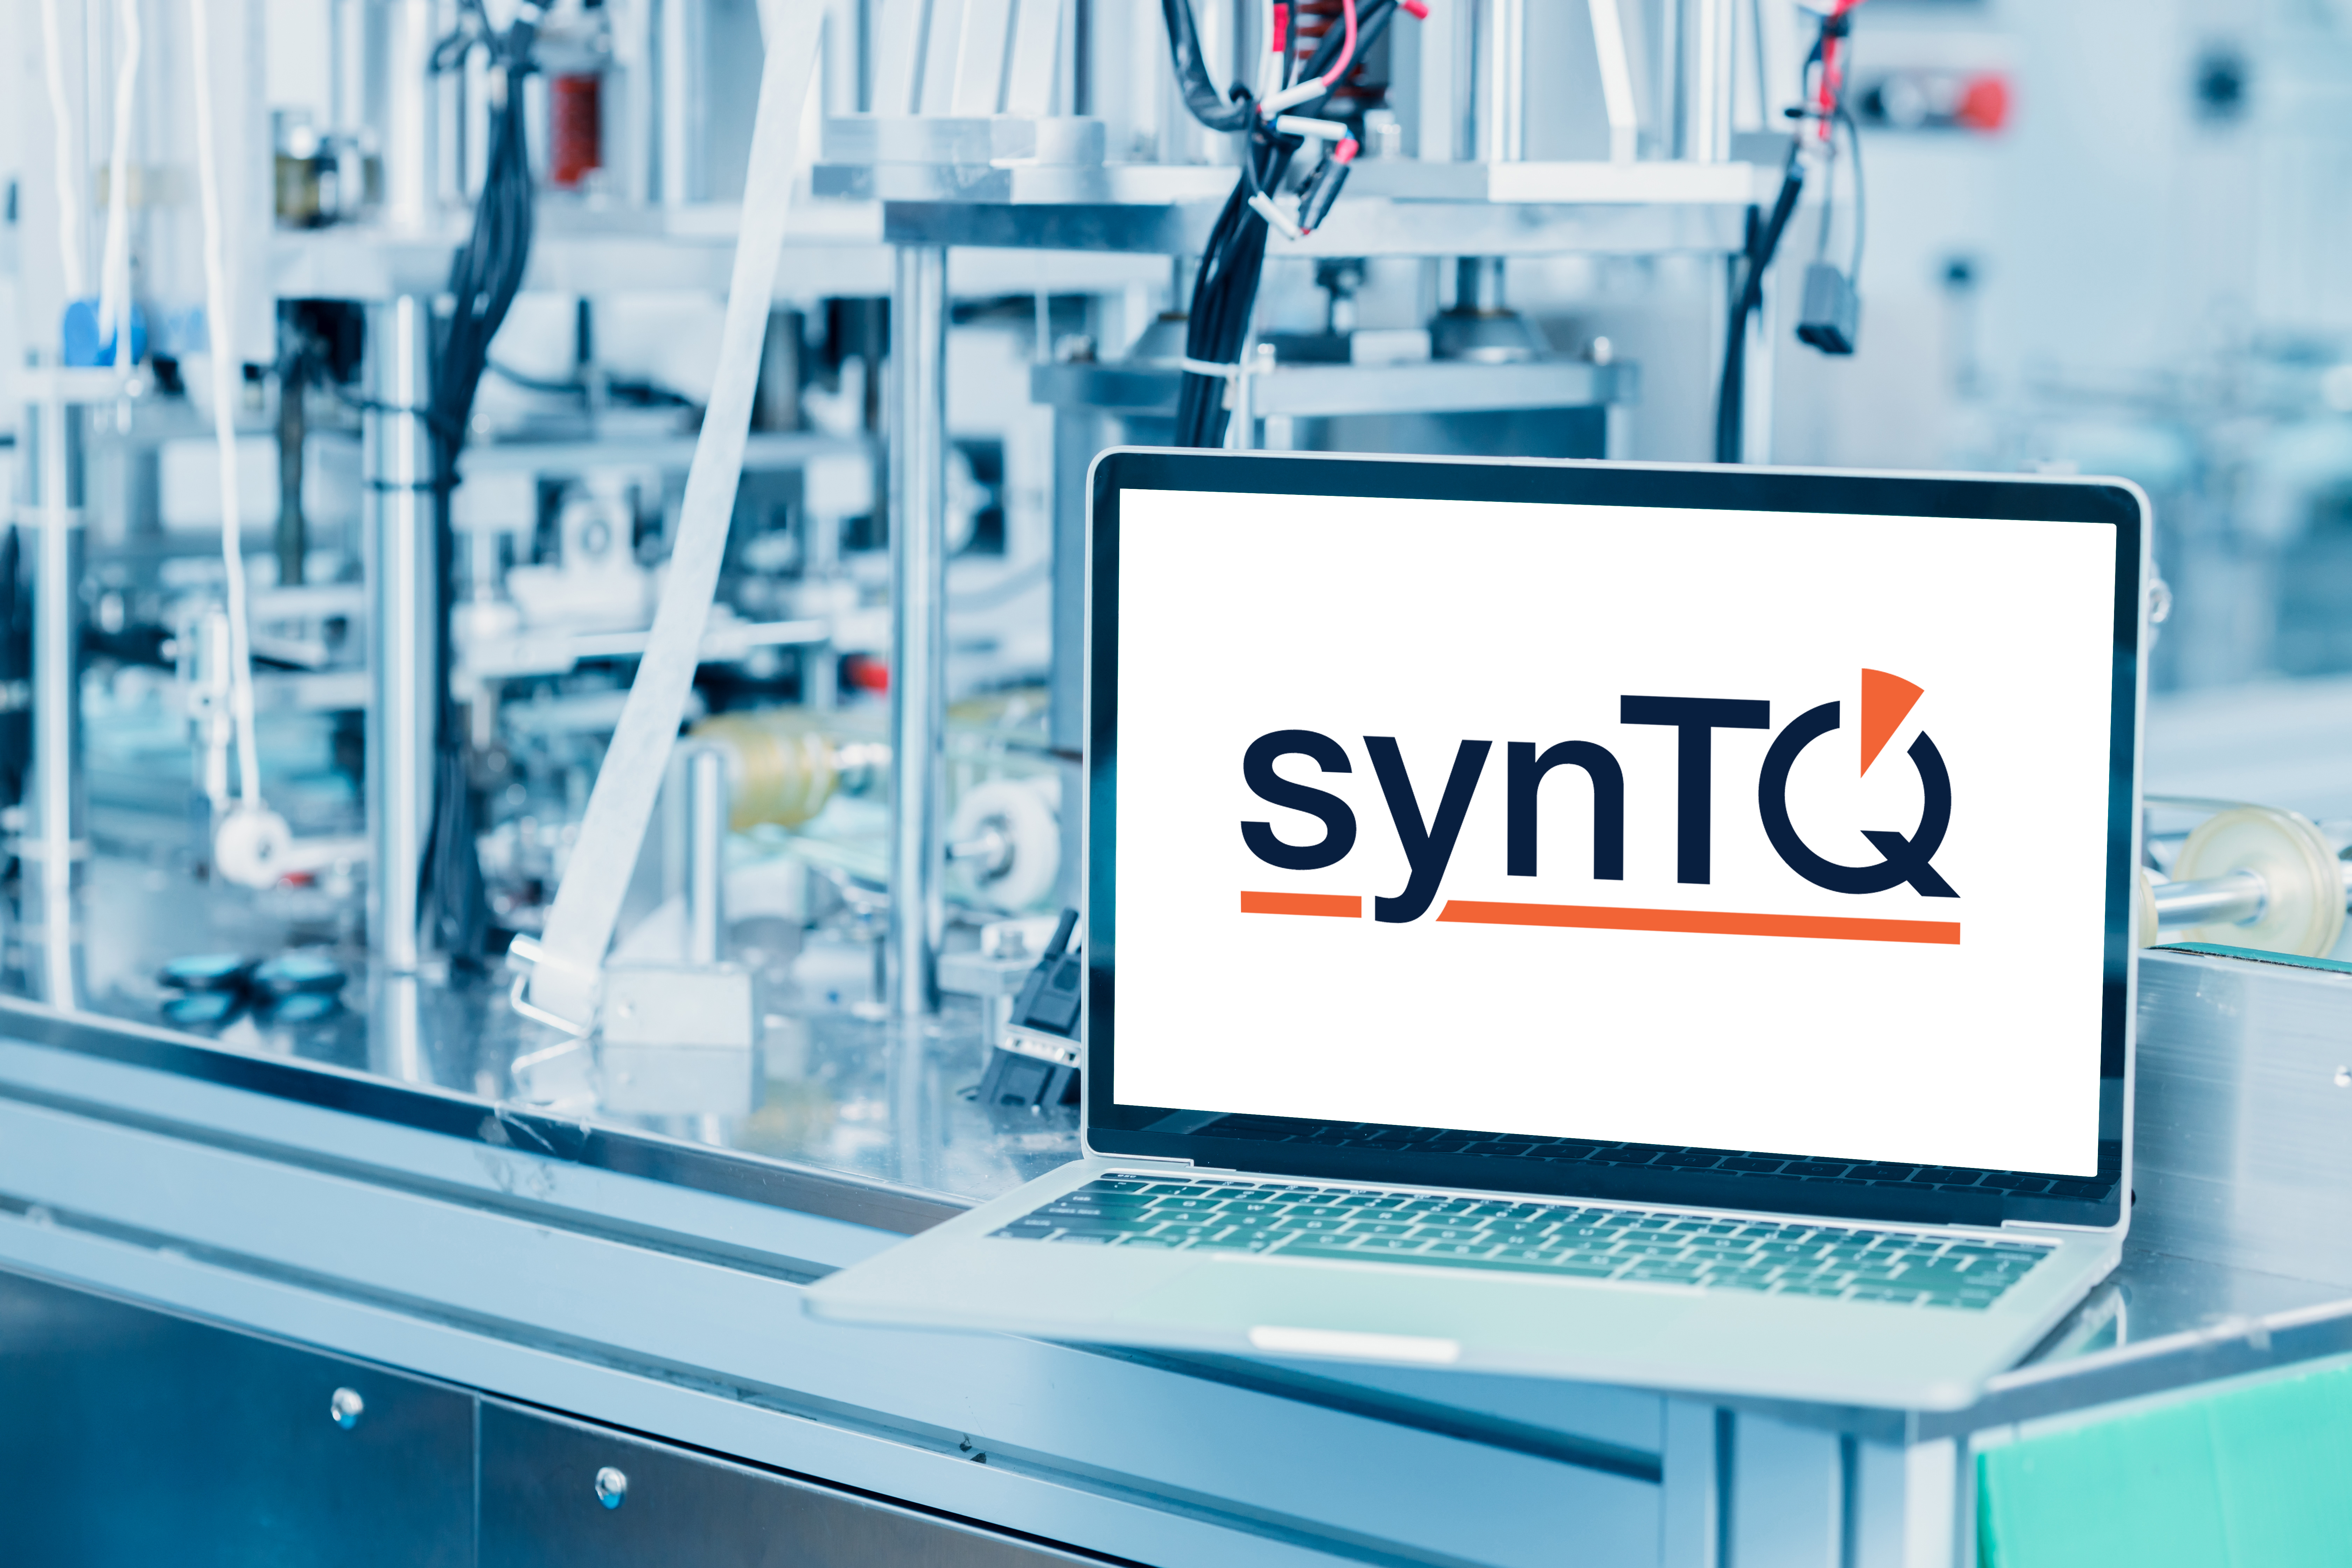 An automated laboratory system that leverages a digital transformation enabling software, such as synTQ, can optimise product quality, regulatory compliance and manufacturing efficiency.